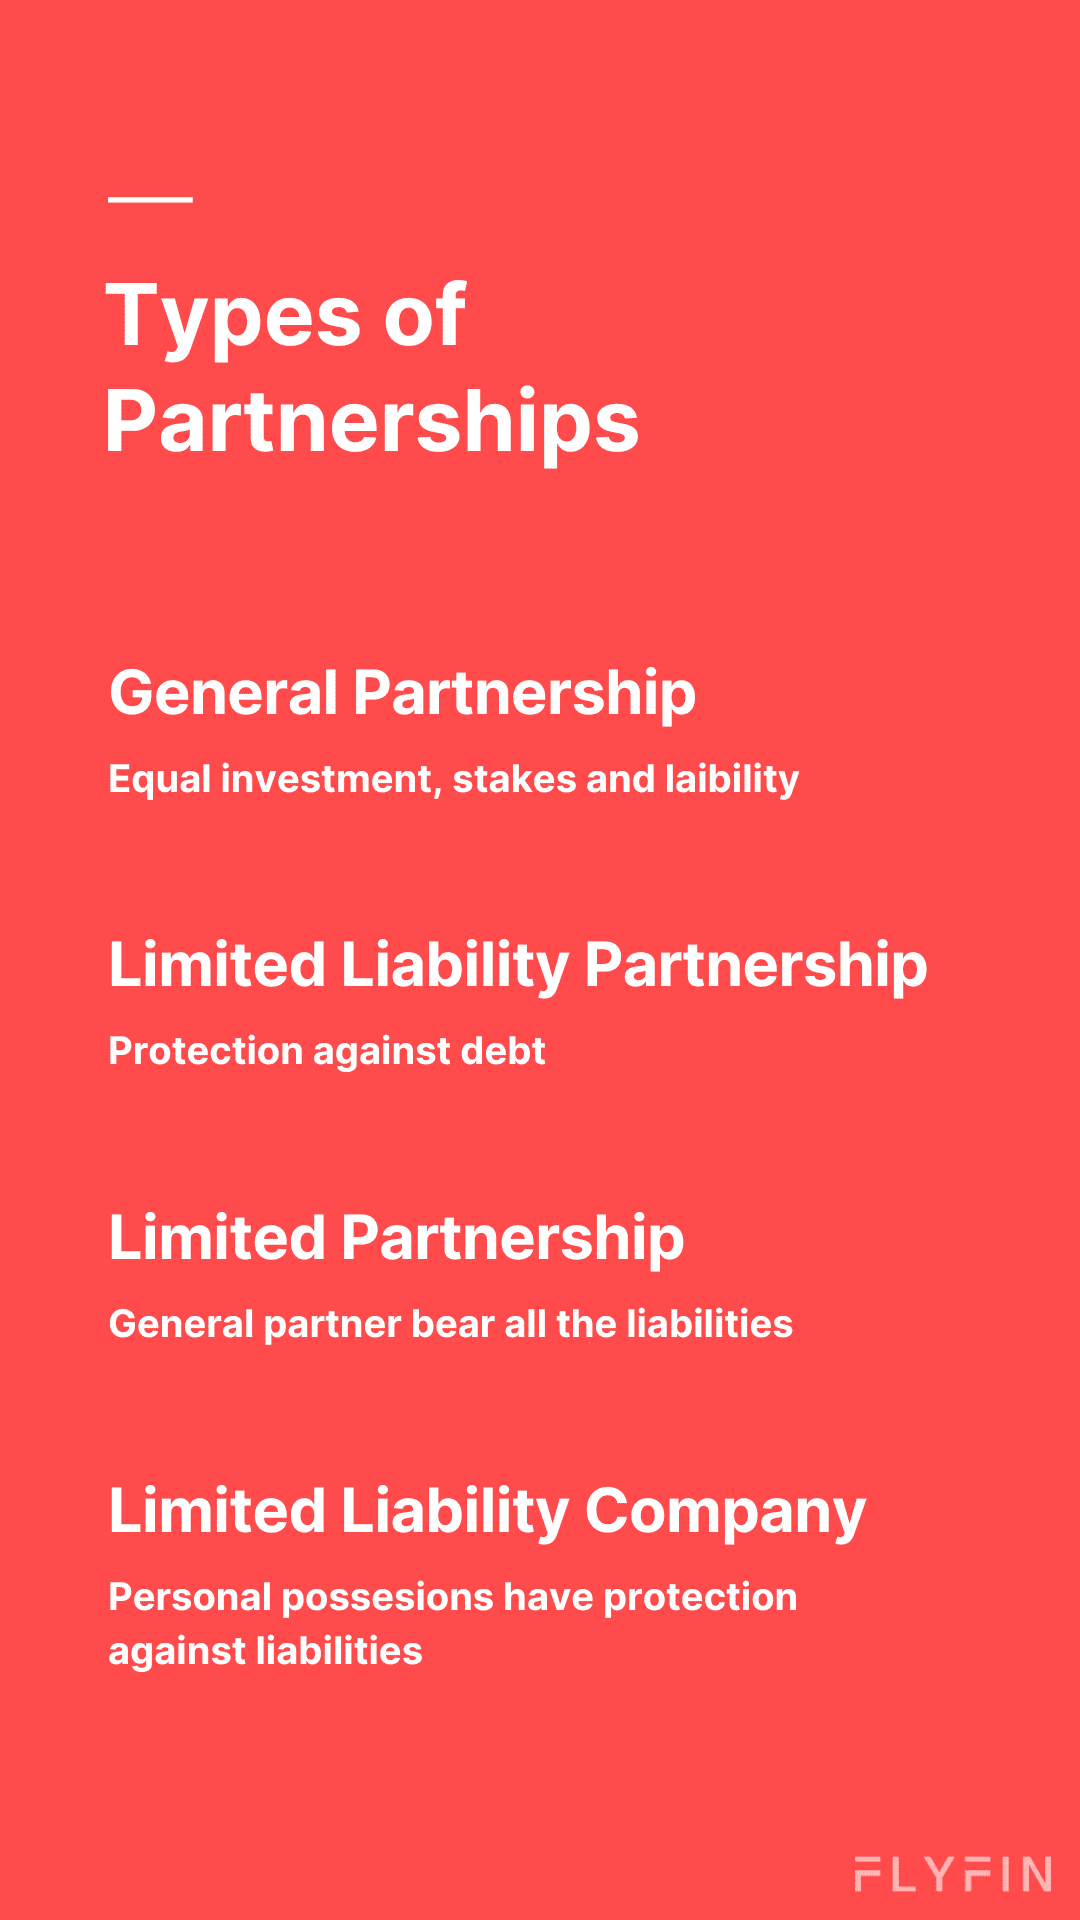 What is a partnership?